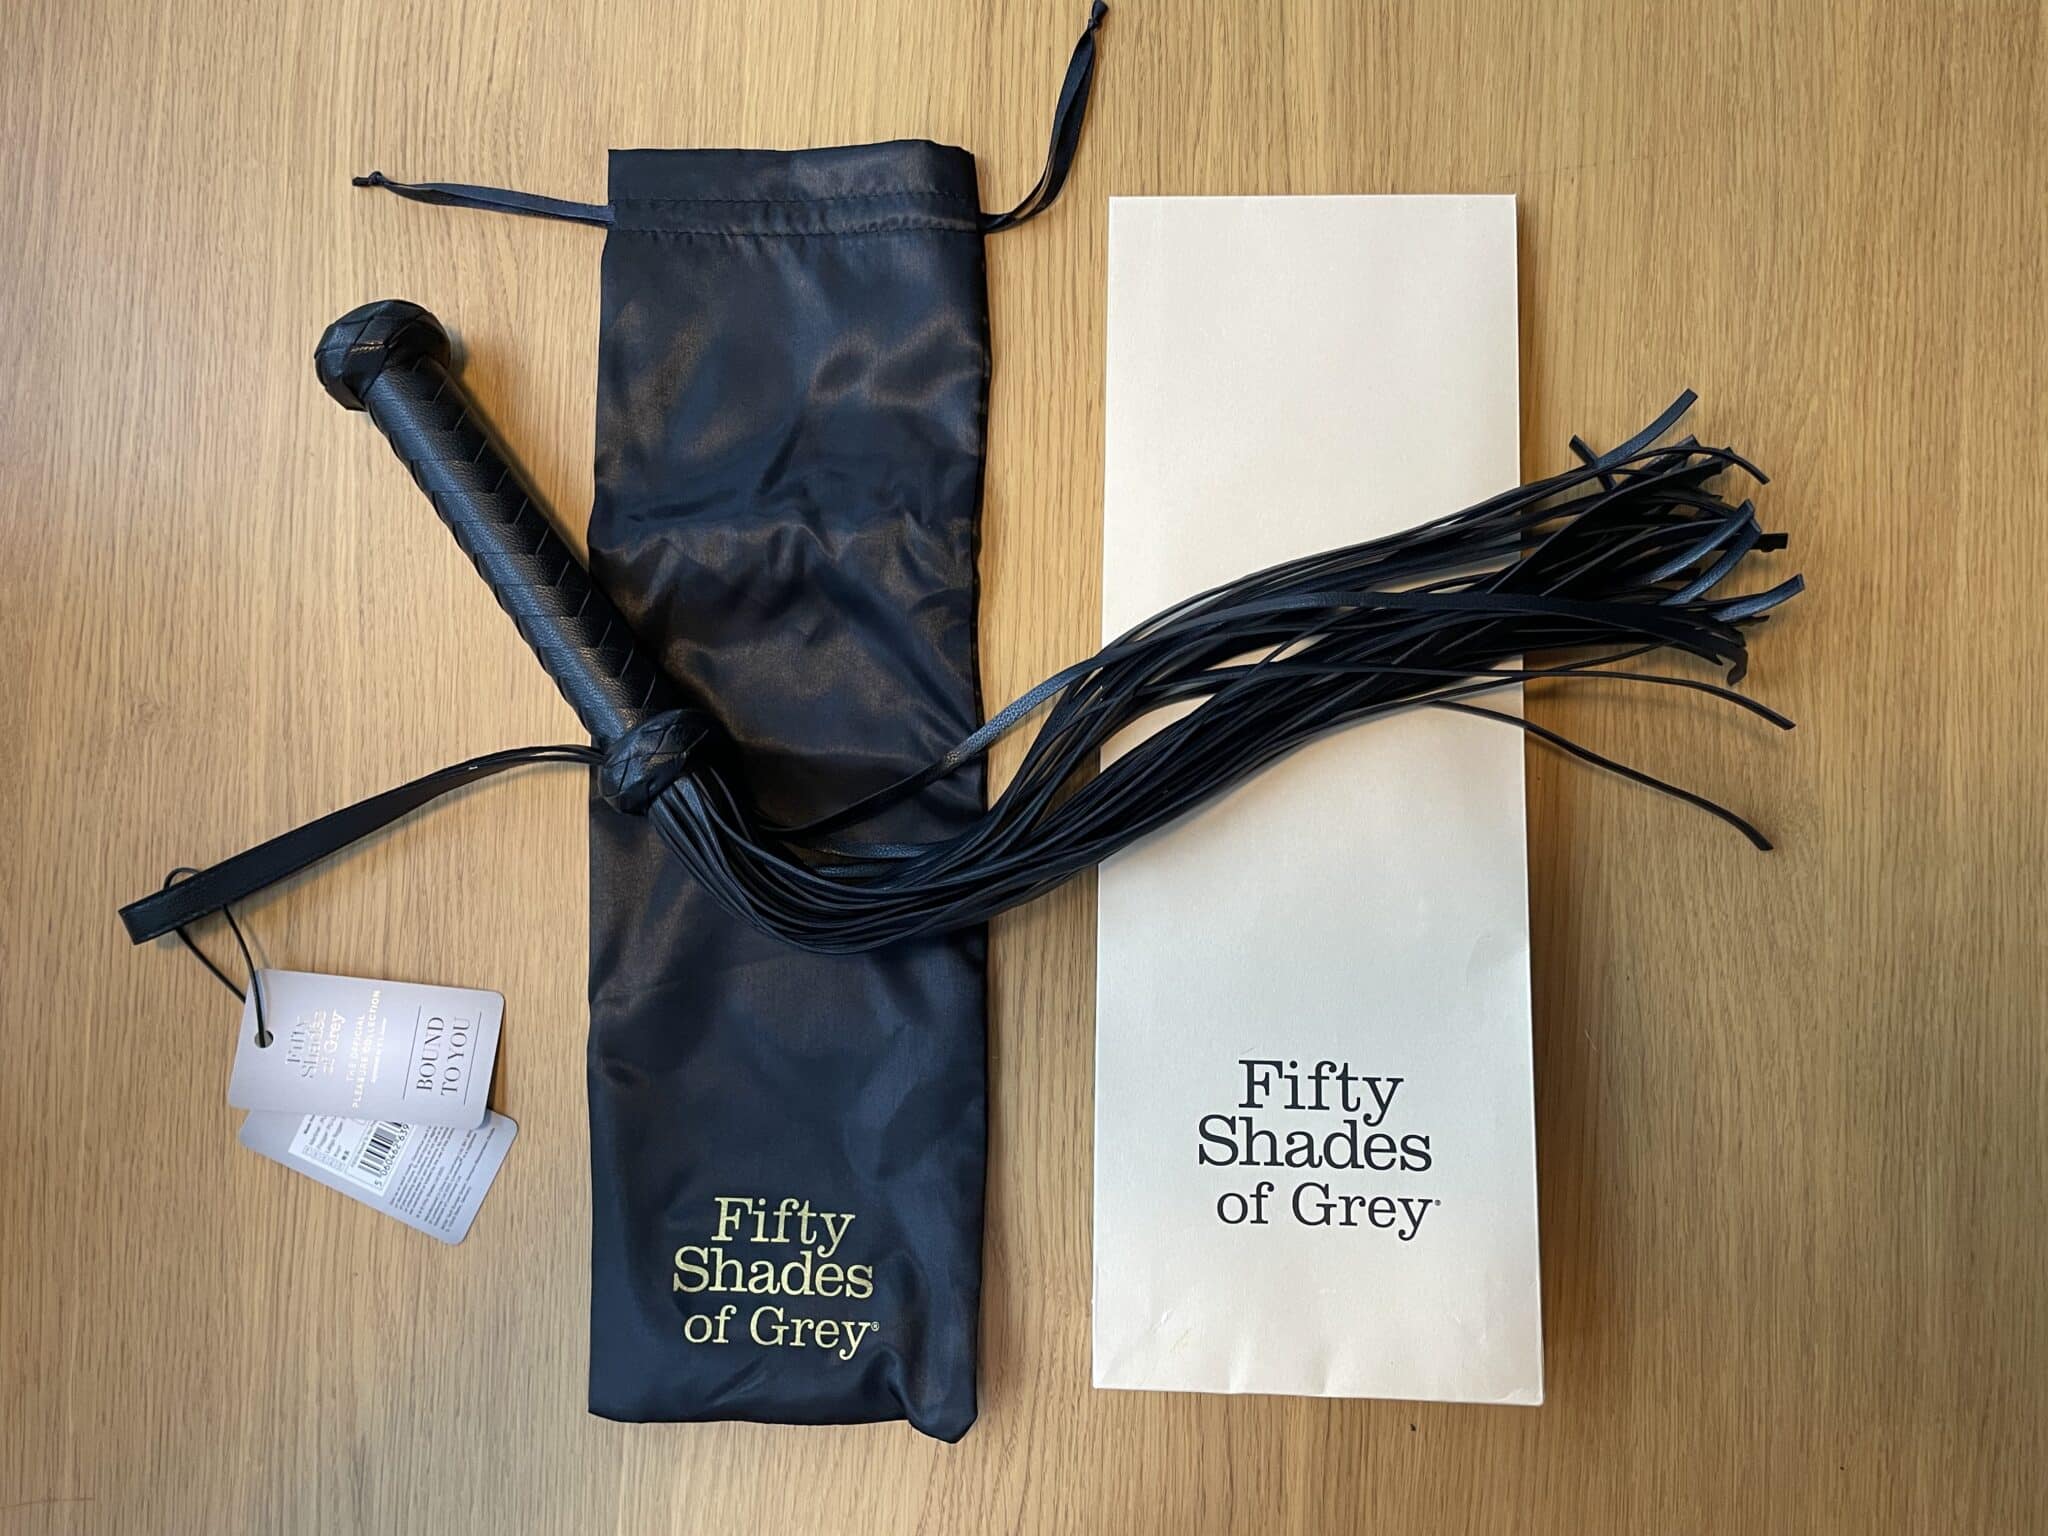 Fifty Shades of Grey Bound to You Flogger The Fifty Shades of Grey Bound to You Flogger: Presentation and Packaging